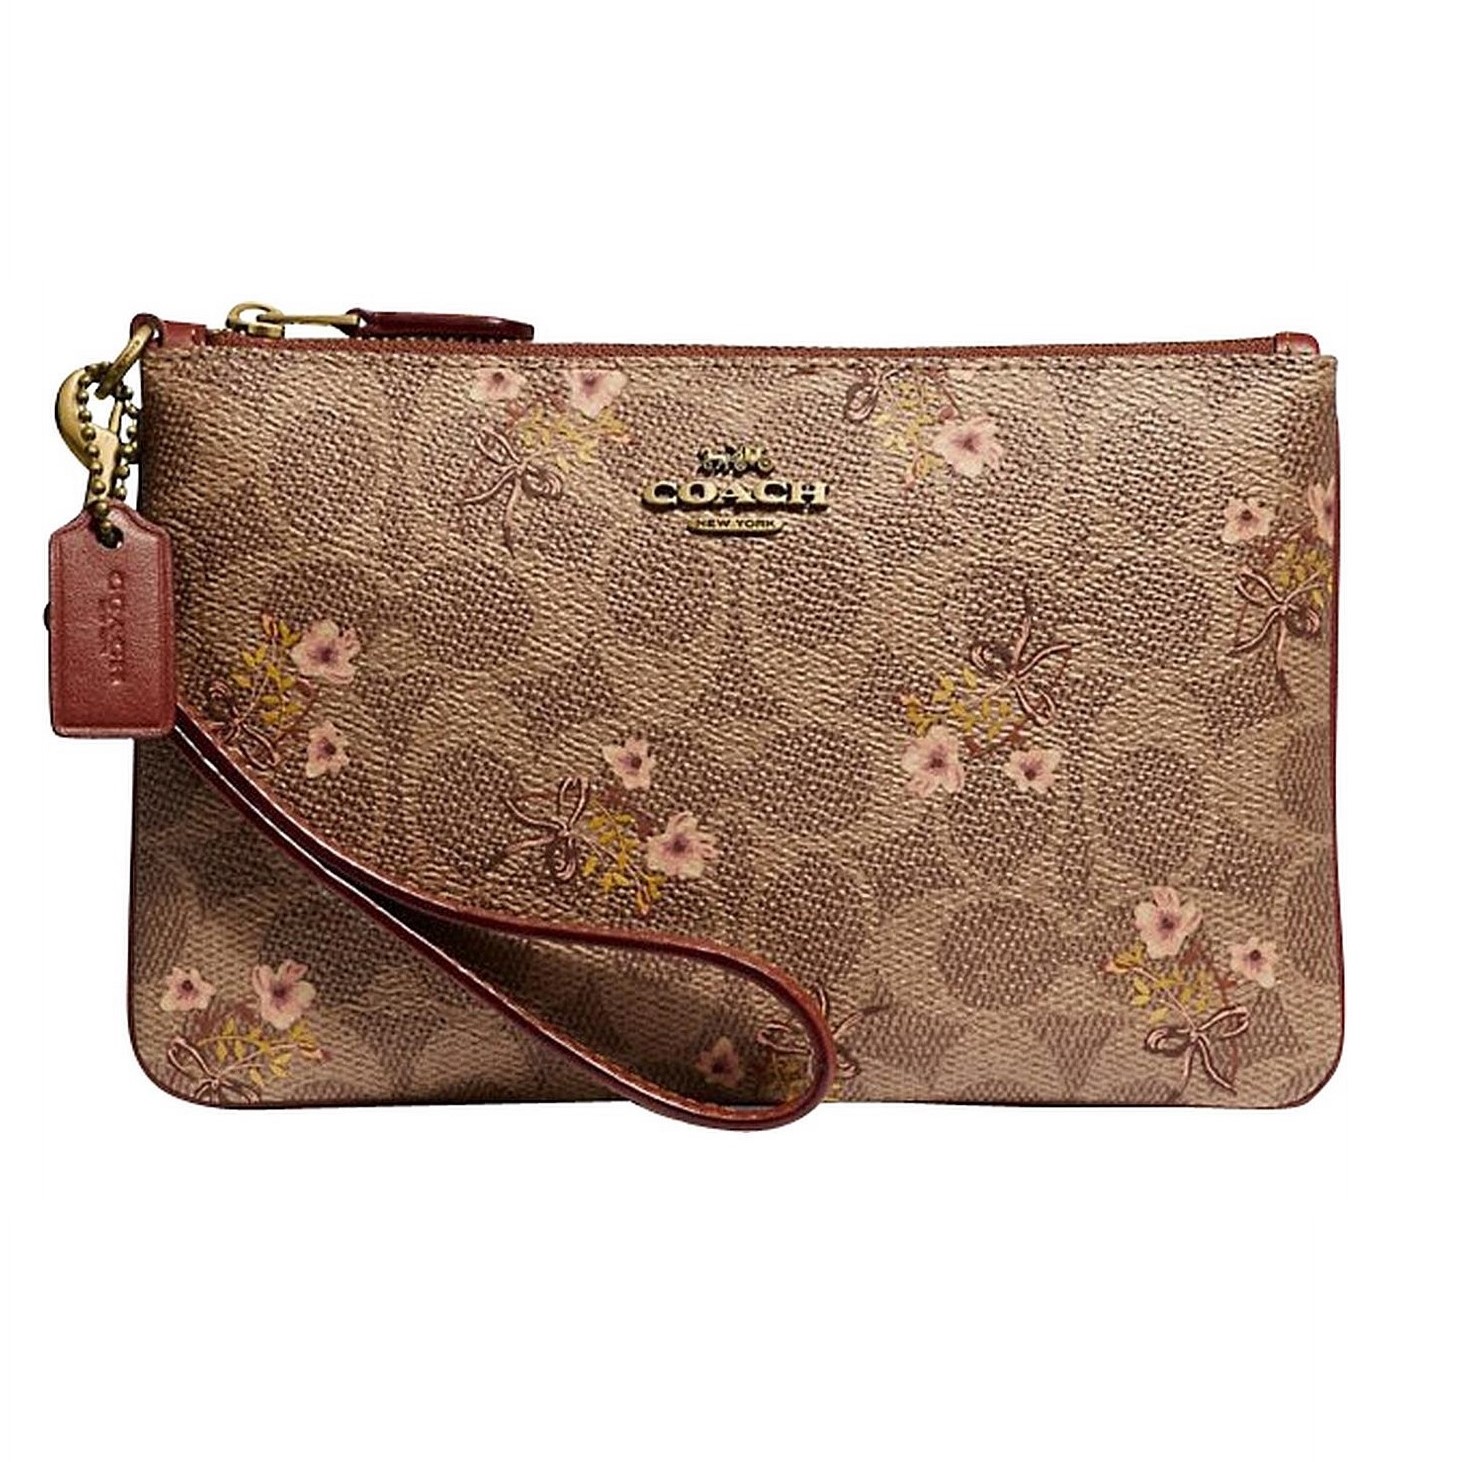 VÍ CẦM TAY NỮ COACH SMALL WRISTLET IN SIGNATURE CANVAS WITH FLORAL BOW PRINT F67070 3